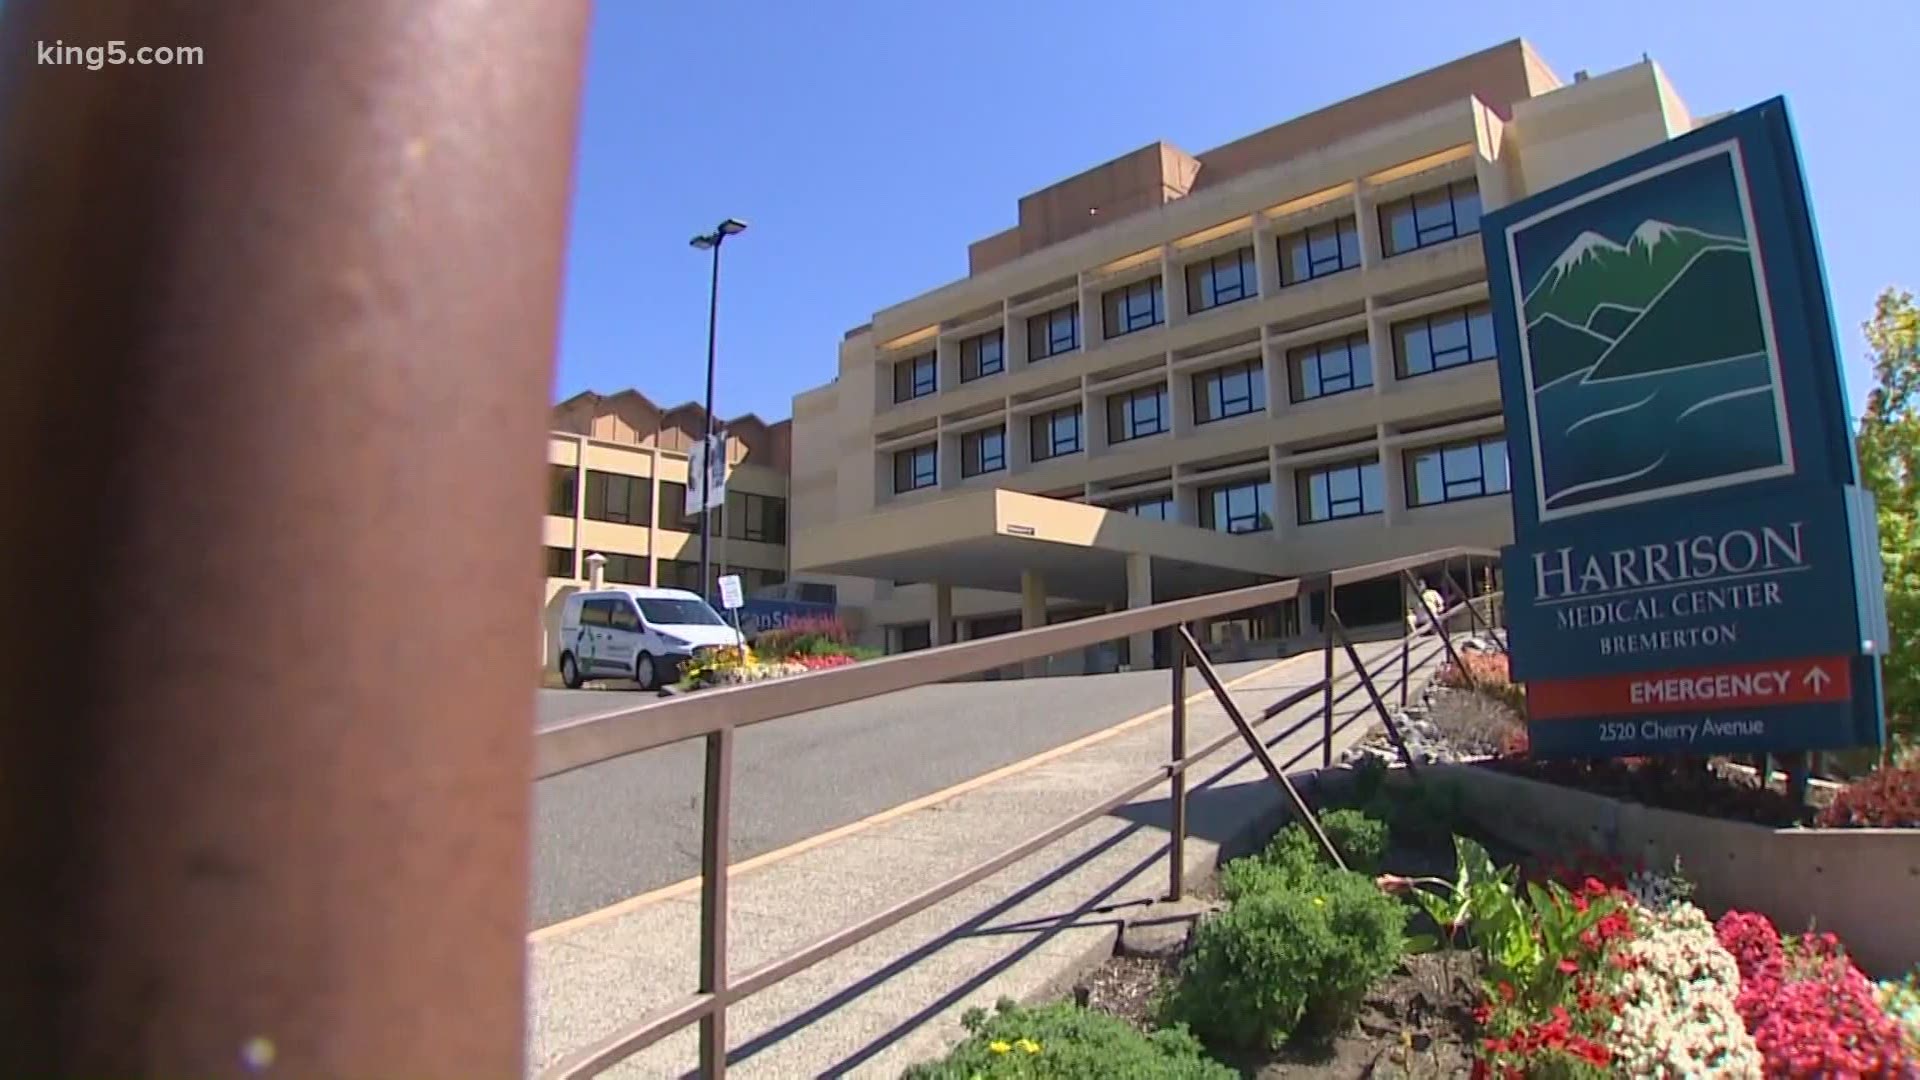 After an outbreak that grew to 45 cases in a few weeks, the union representing nurses say they have concerns about how the hospital has handled the outbreak.